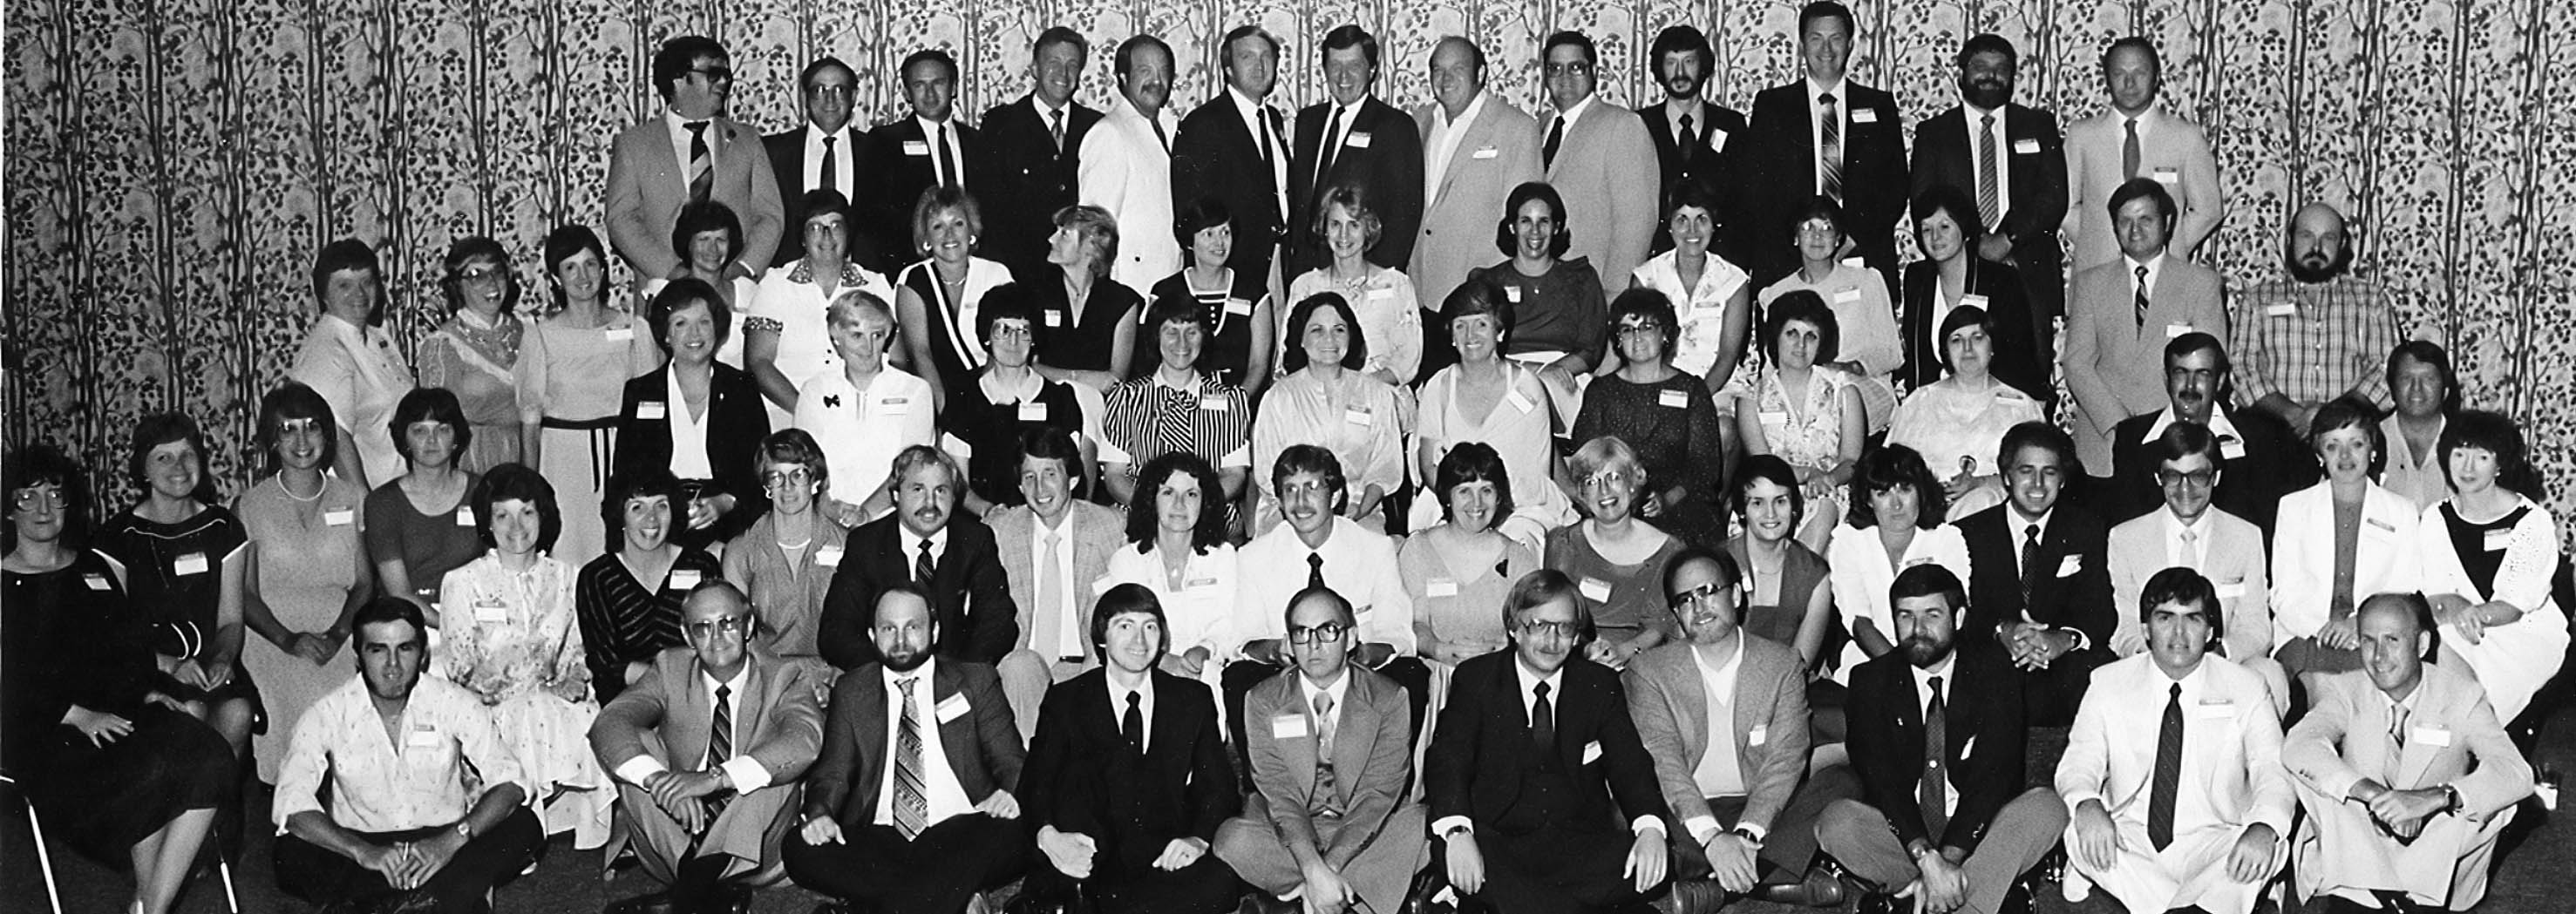 class of 1962 65th birthday party group picture